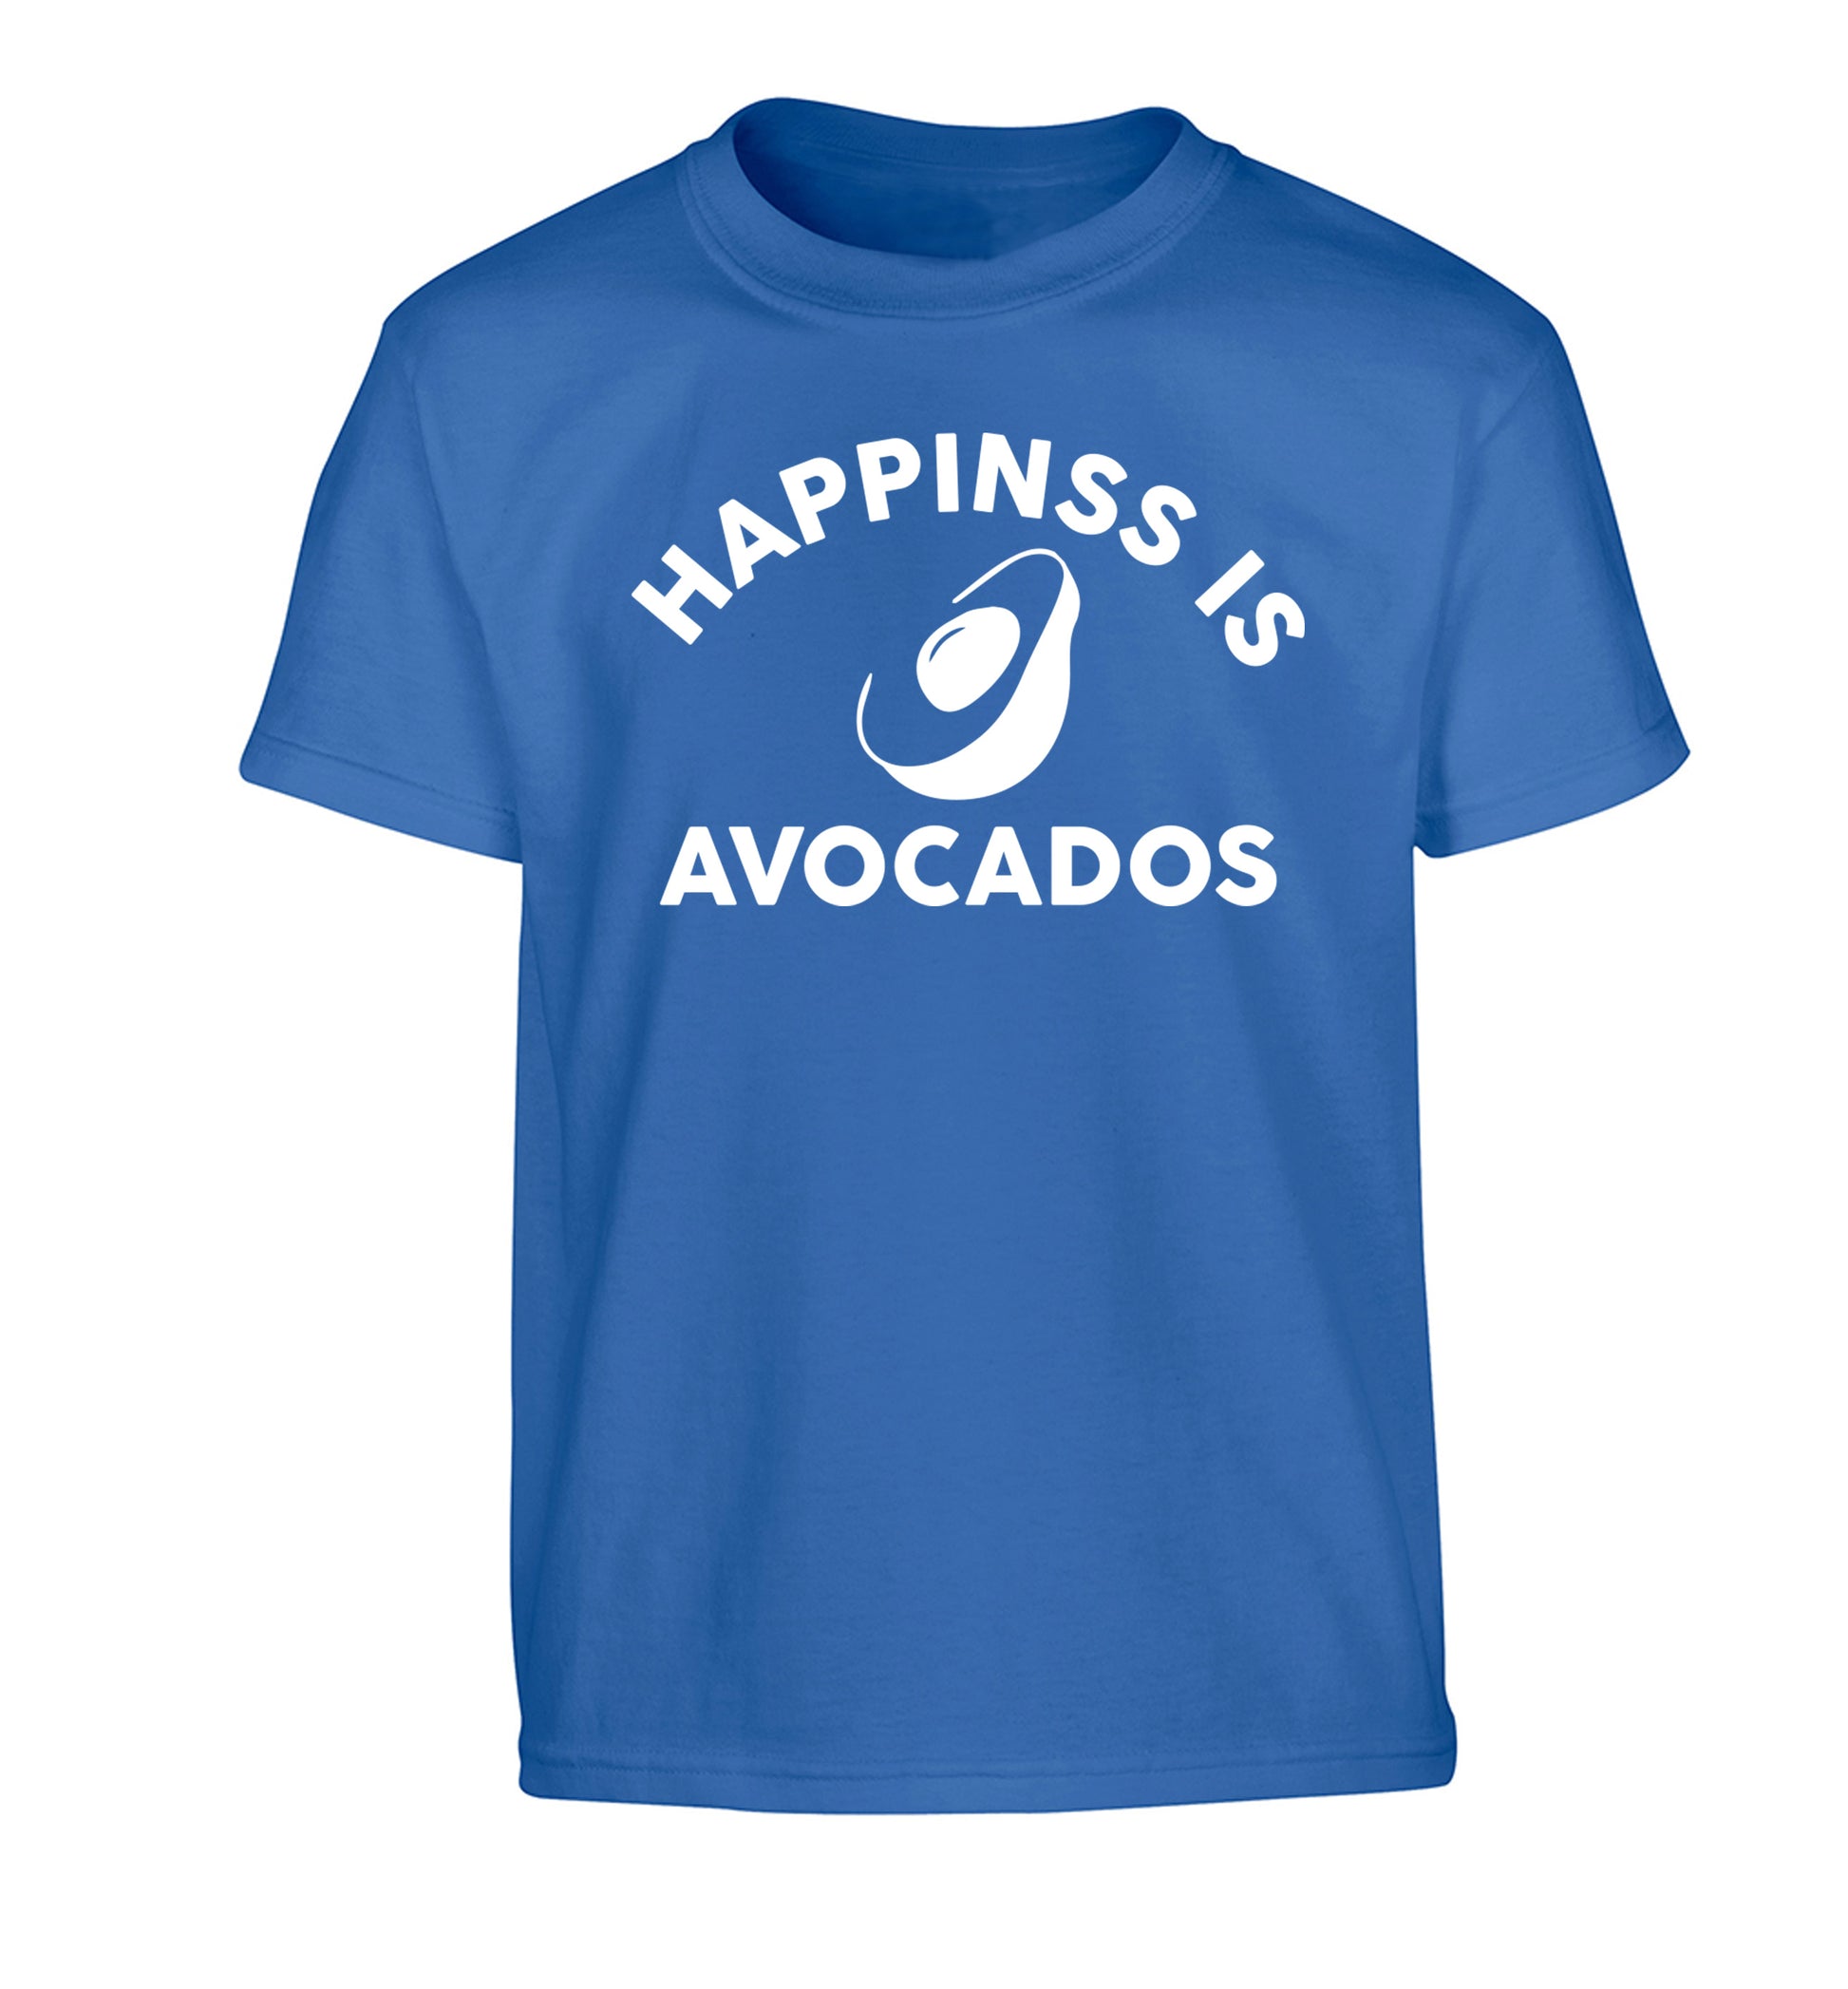 Happiness is avocados Children's blue Tshirt 12-14 Years